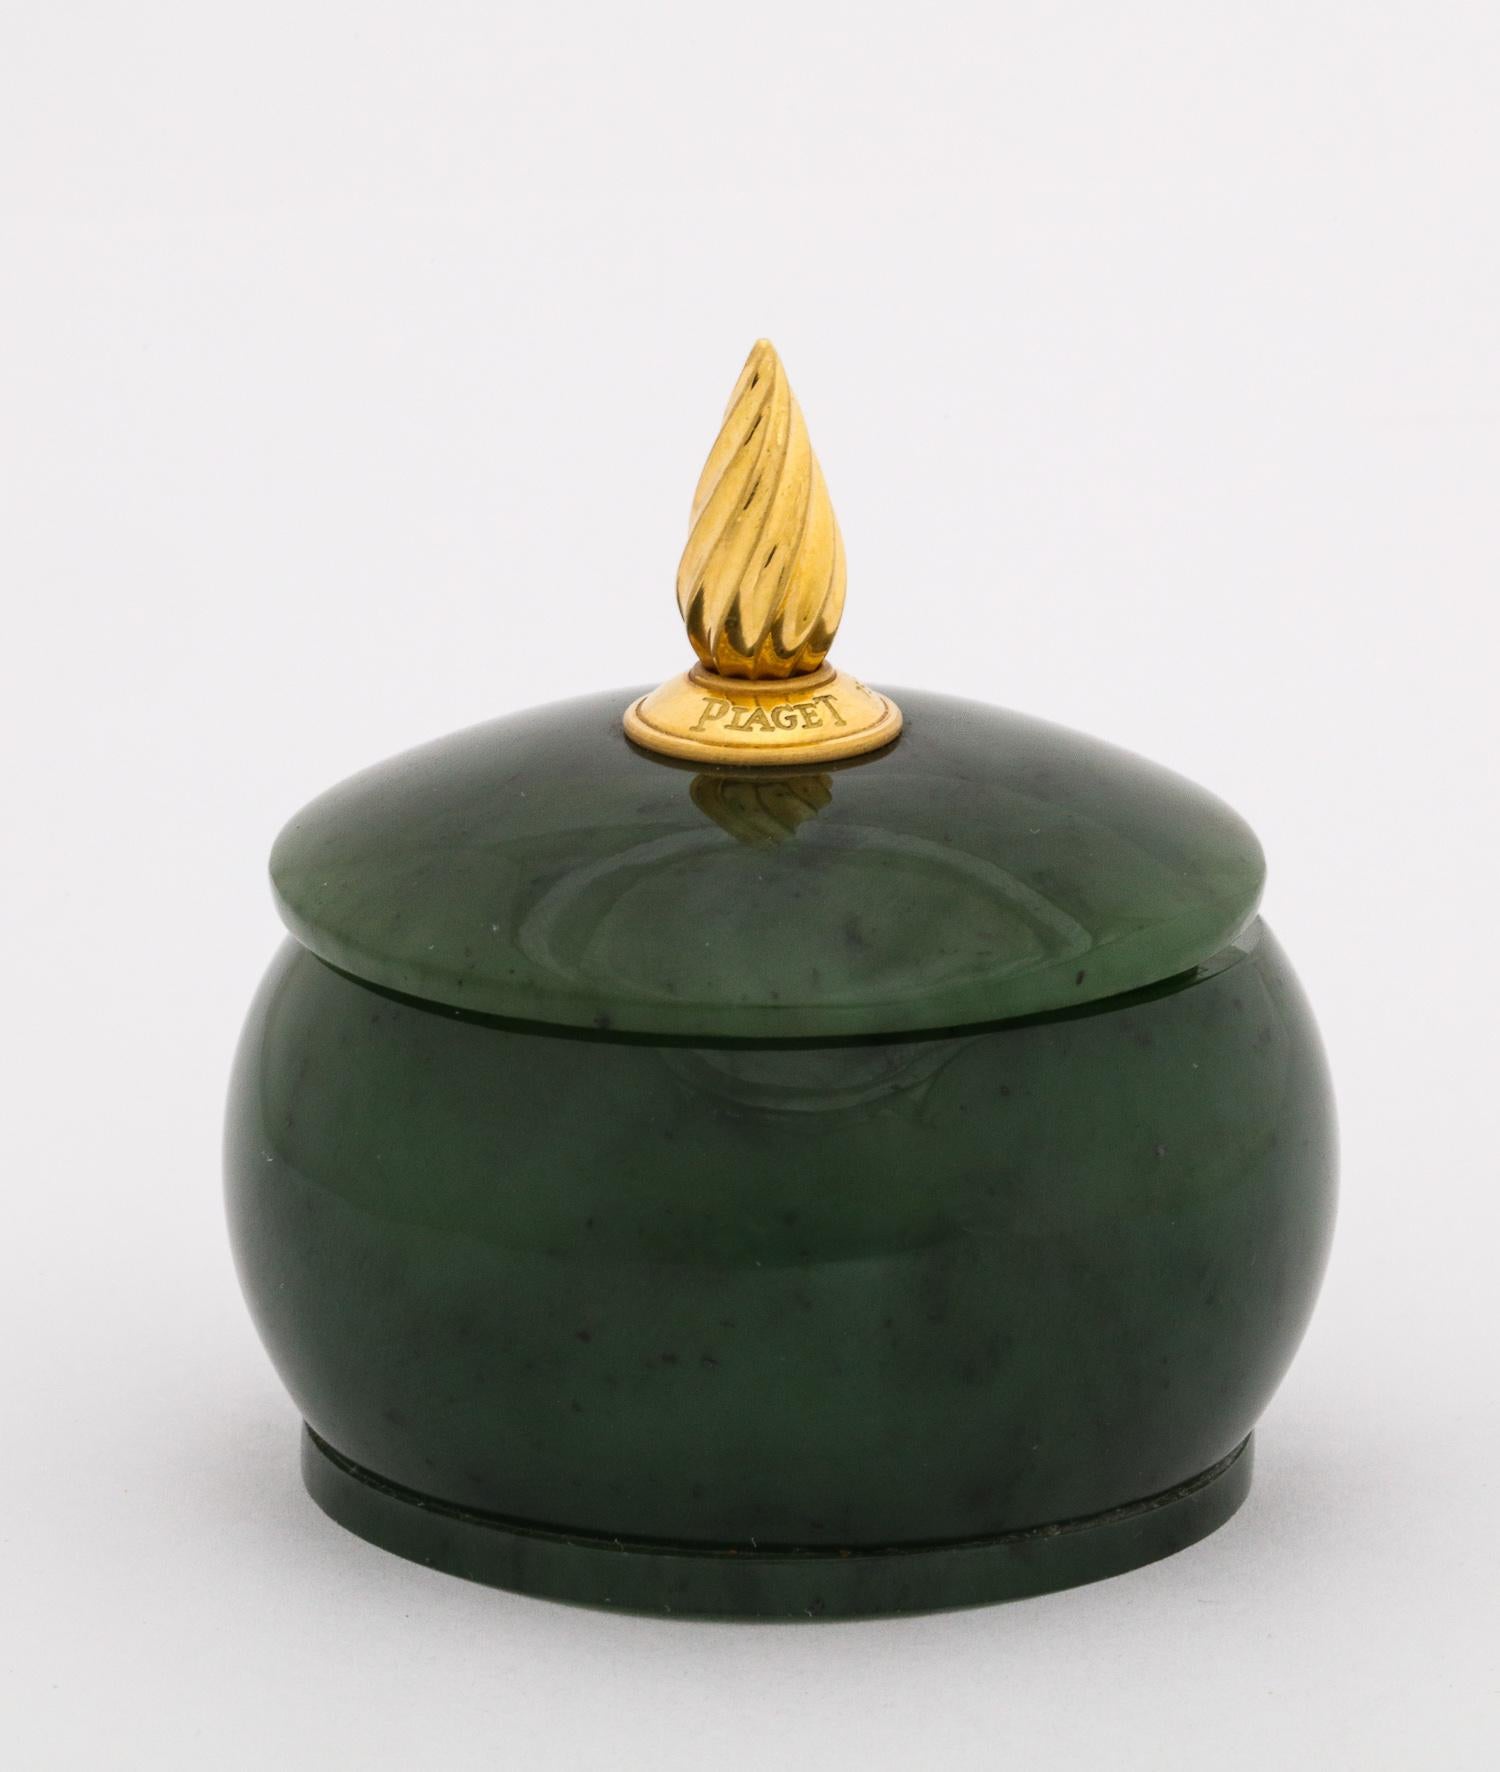 18-Karat Gold and Spinach Jade Round Box with Cover by Piaget Geneve 5